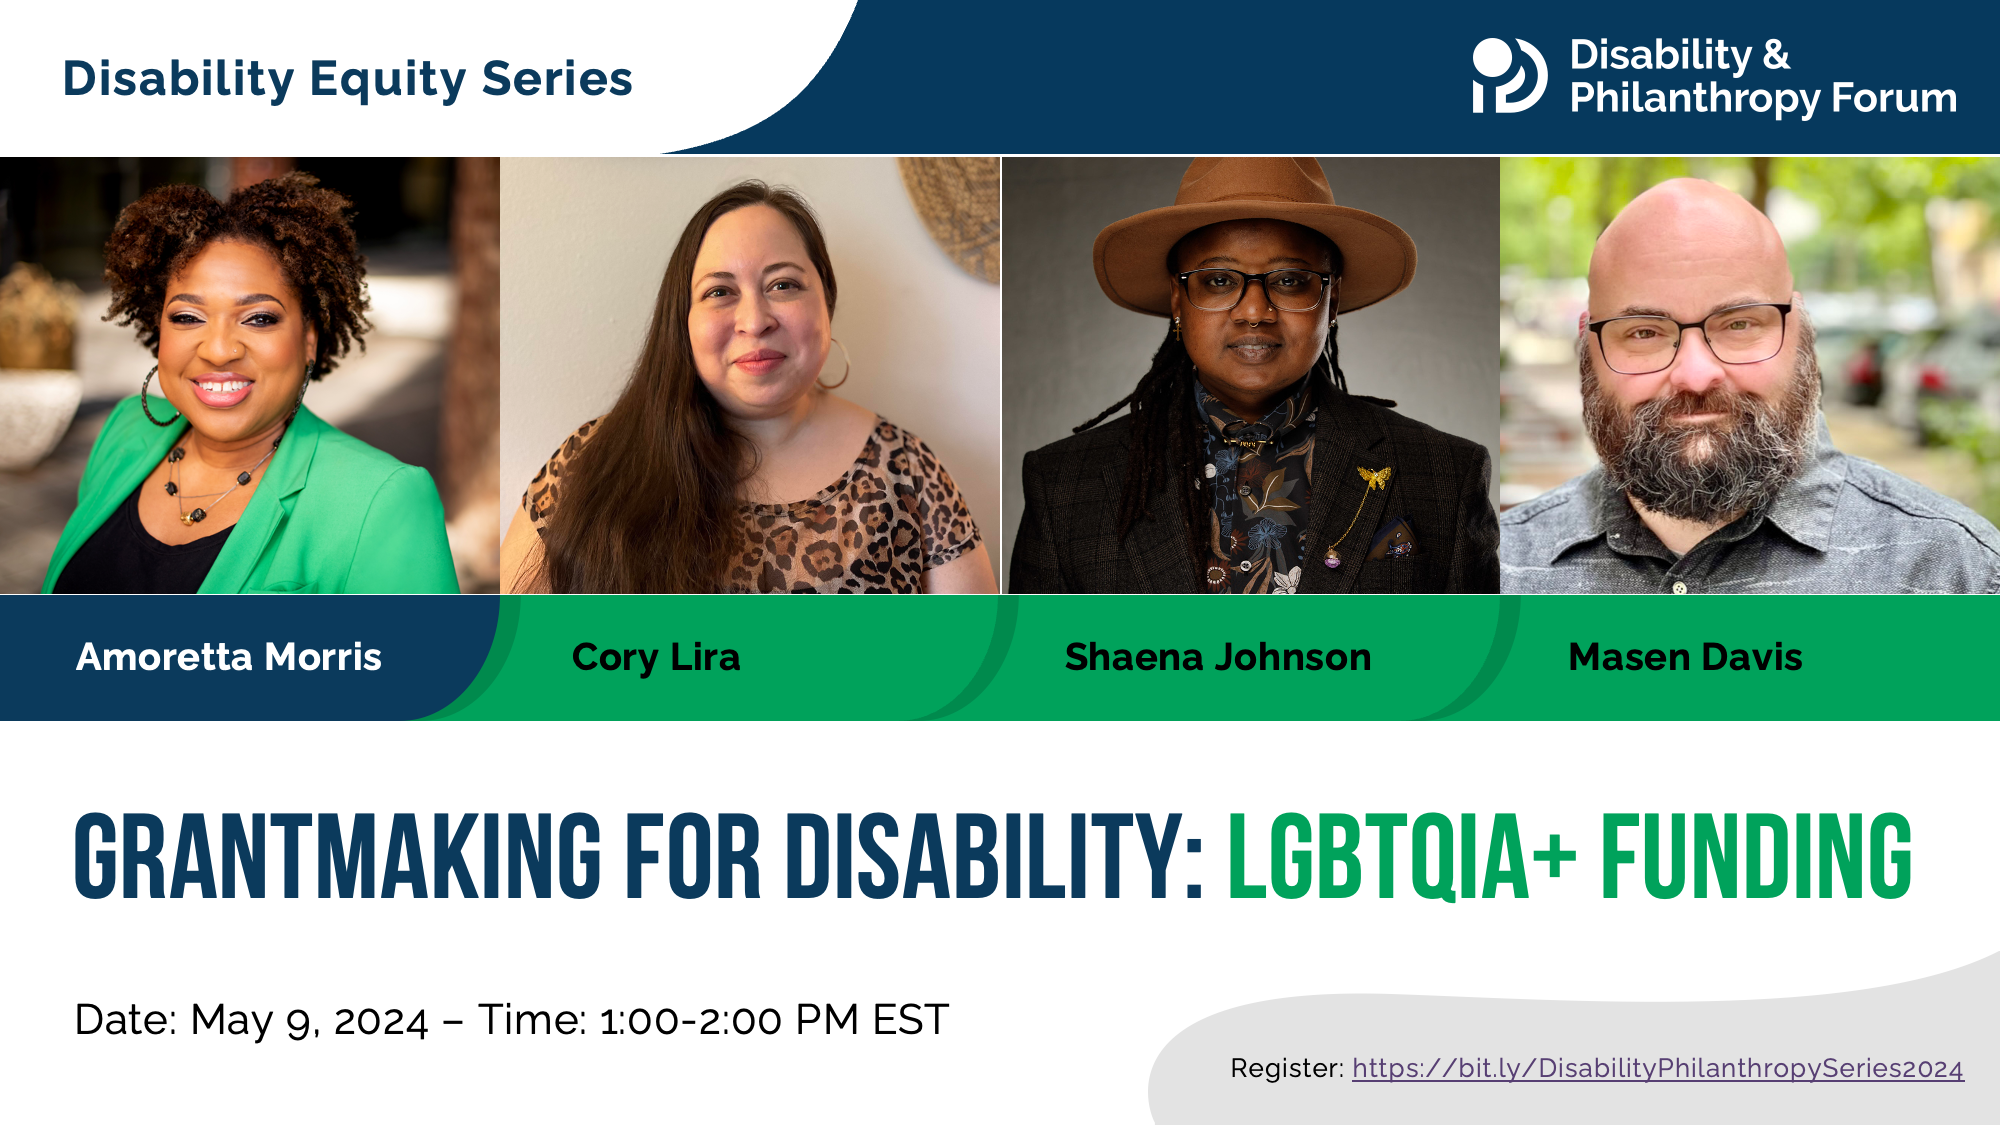 Photos of Grantmaking for Disability: LGBTQIA+ Funding moderator Amoretta Morris and panelists Cory Lira, Shaena Johnson, and Masen Davis. The date of the event is May 9, 2024 at 1:00pm ET.